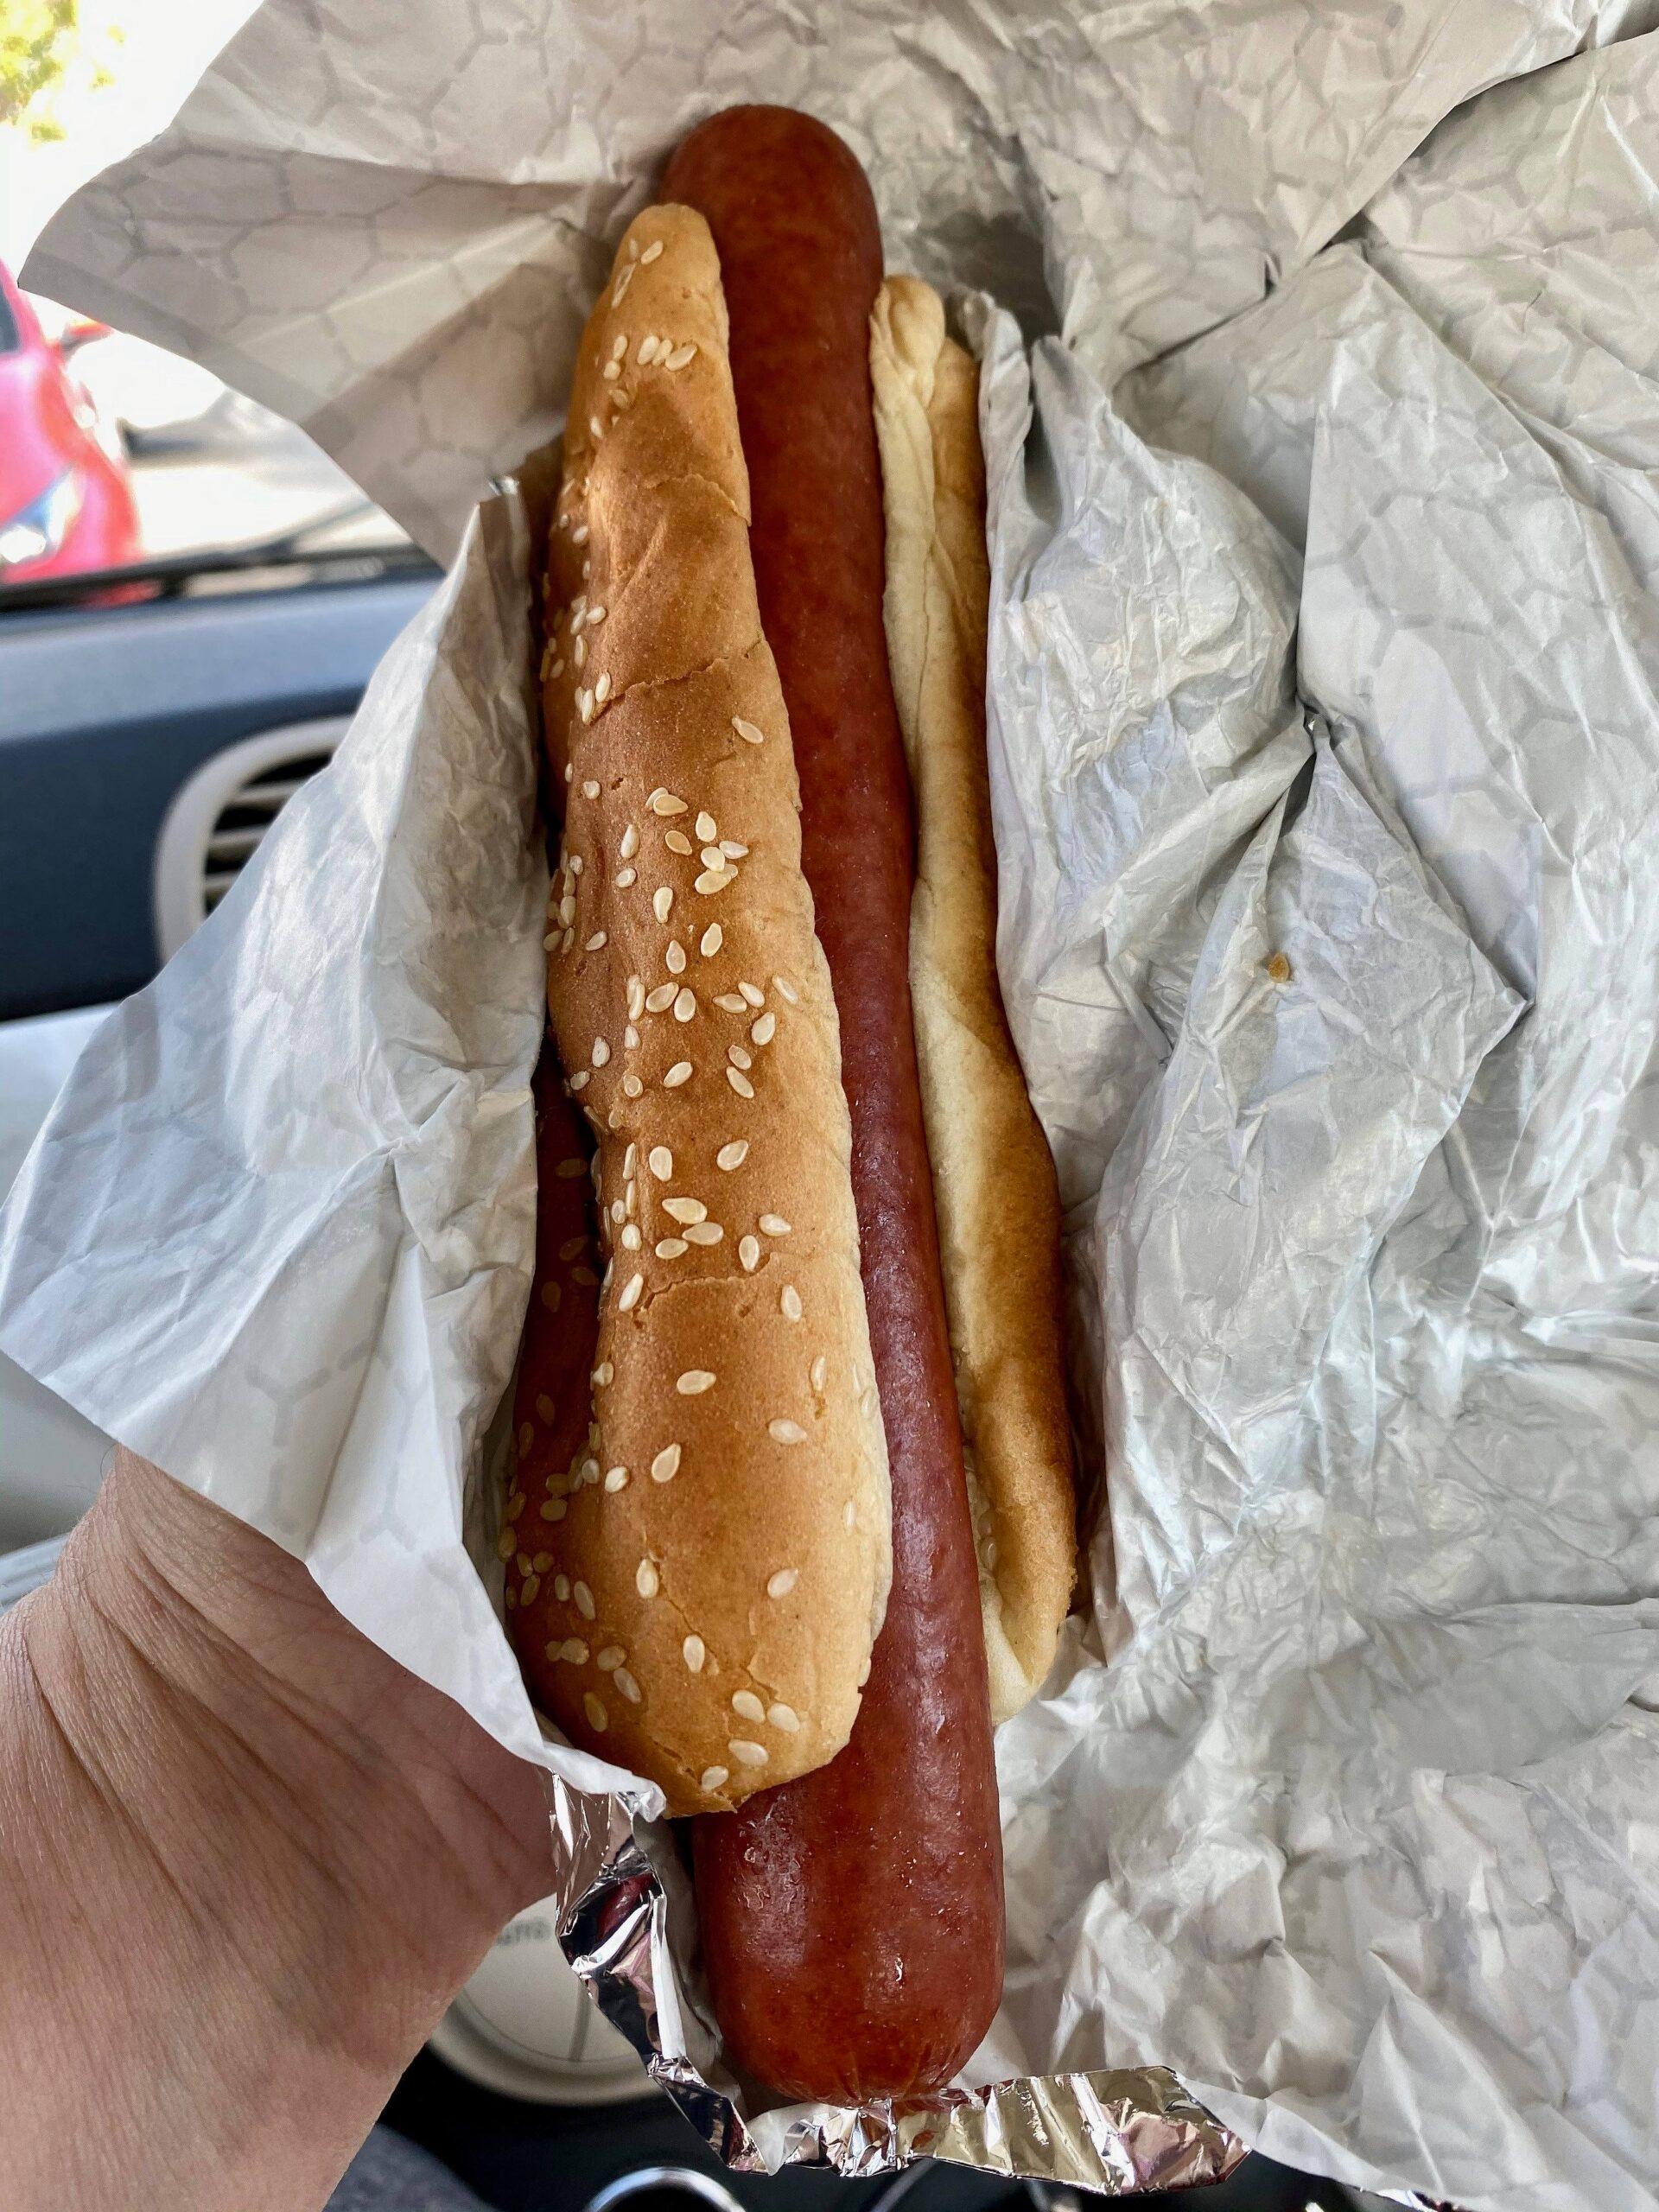 TikTok Star Loses 4.2lbs Eating Only Costco’s $1.50 Hot Dog Meal For A Week